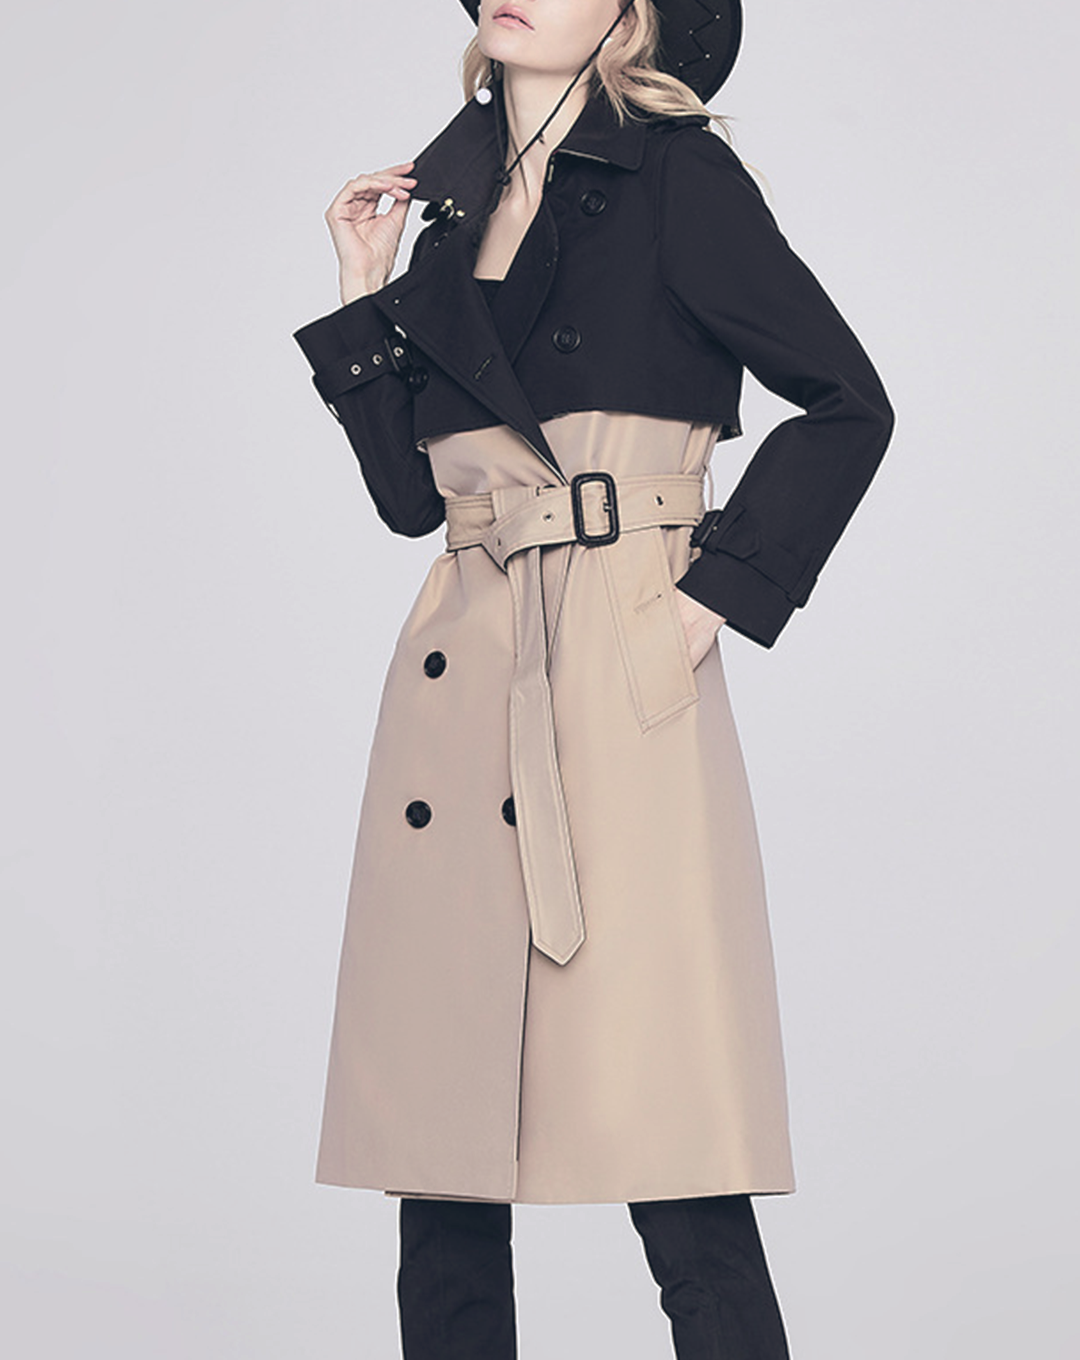 ♀Bicolor Double Breasted Urban Casual Trench Coat